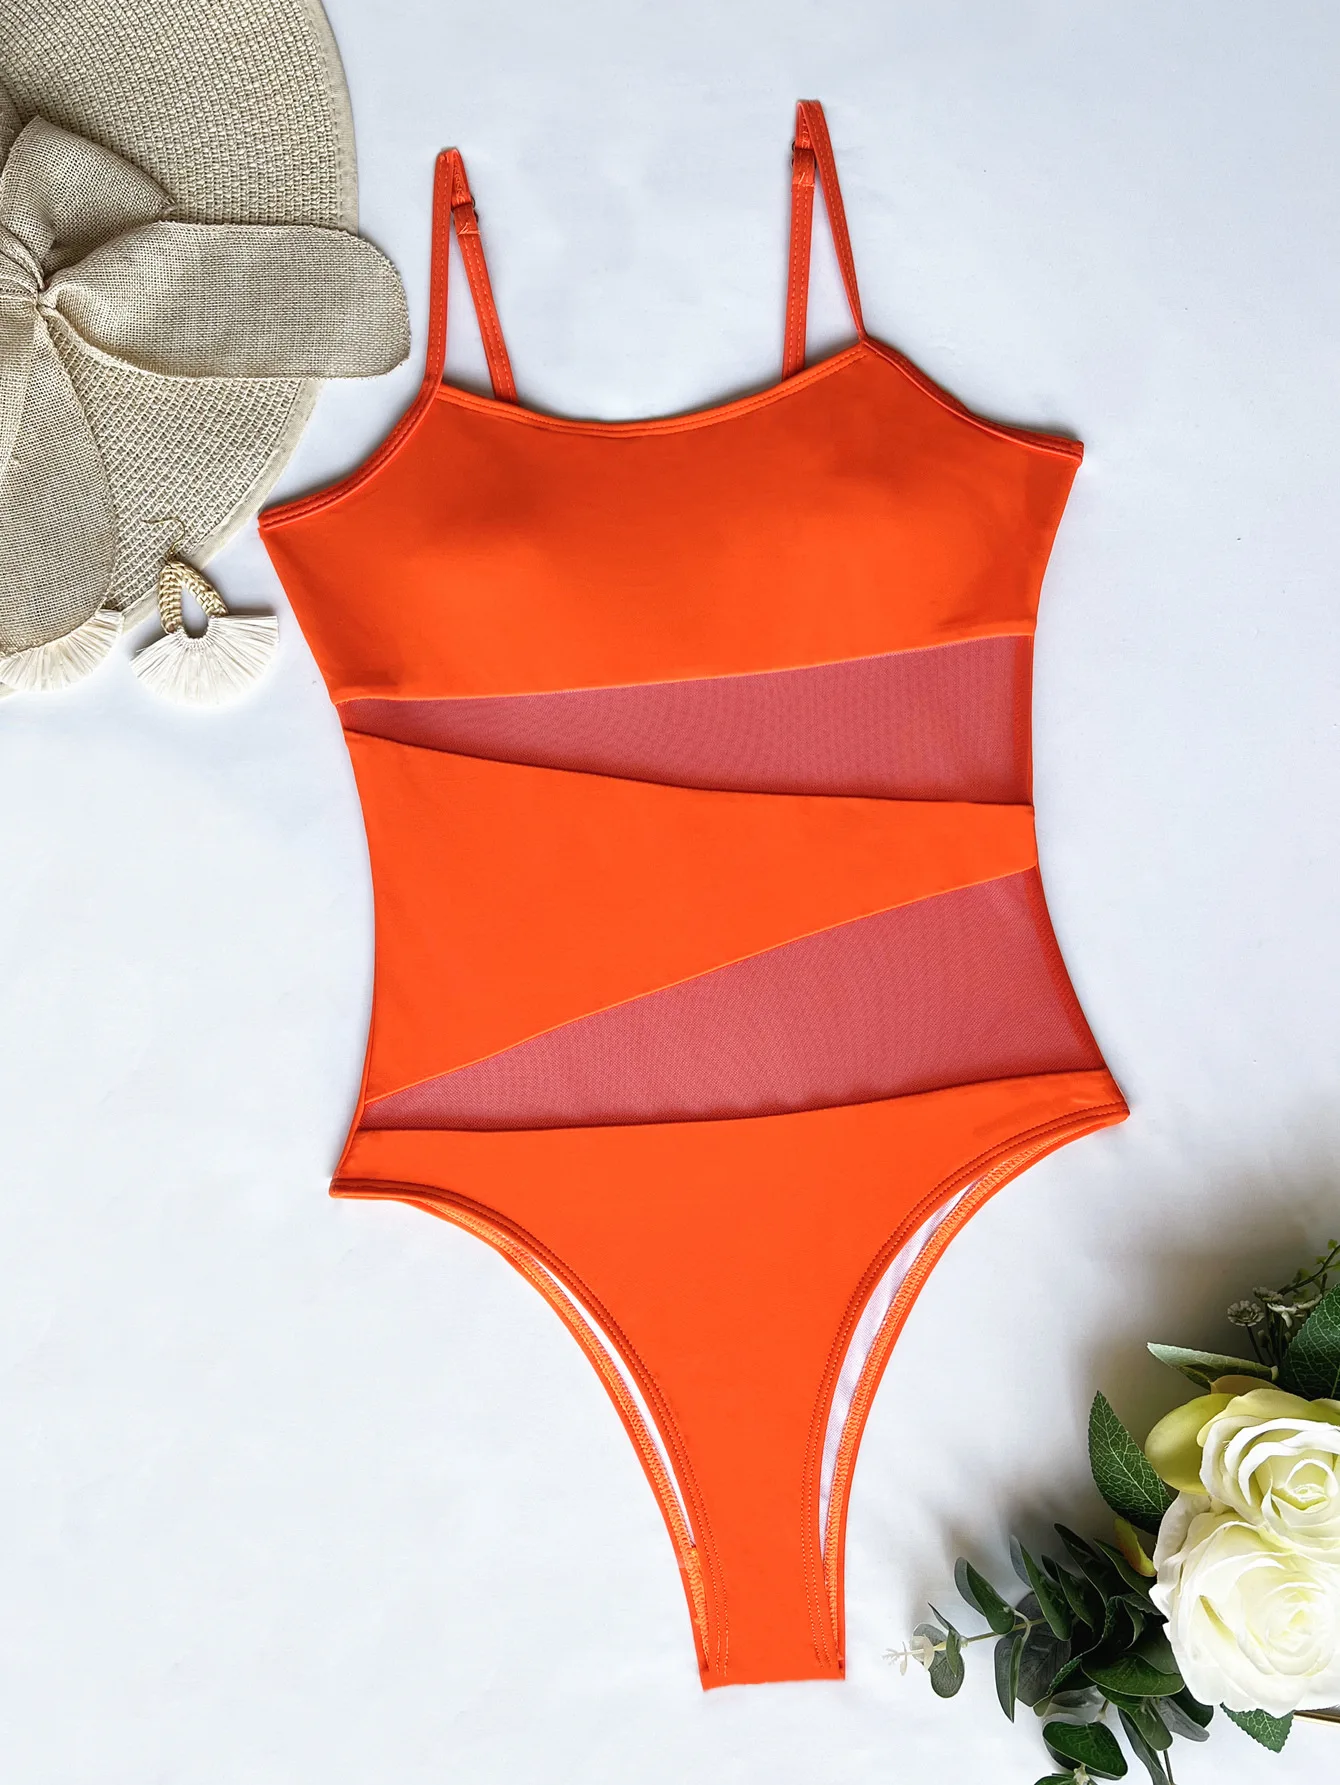 Swimming Suit for Women One-piece Swimsuit Solid Color Sexy Swimsuit Female Hollow Swimsuit Mesh Push Up Bikini Bathing Suits cheeky bikini sets